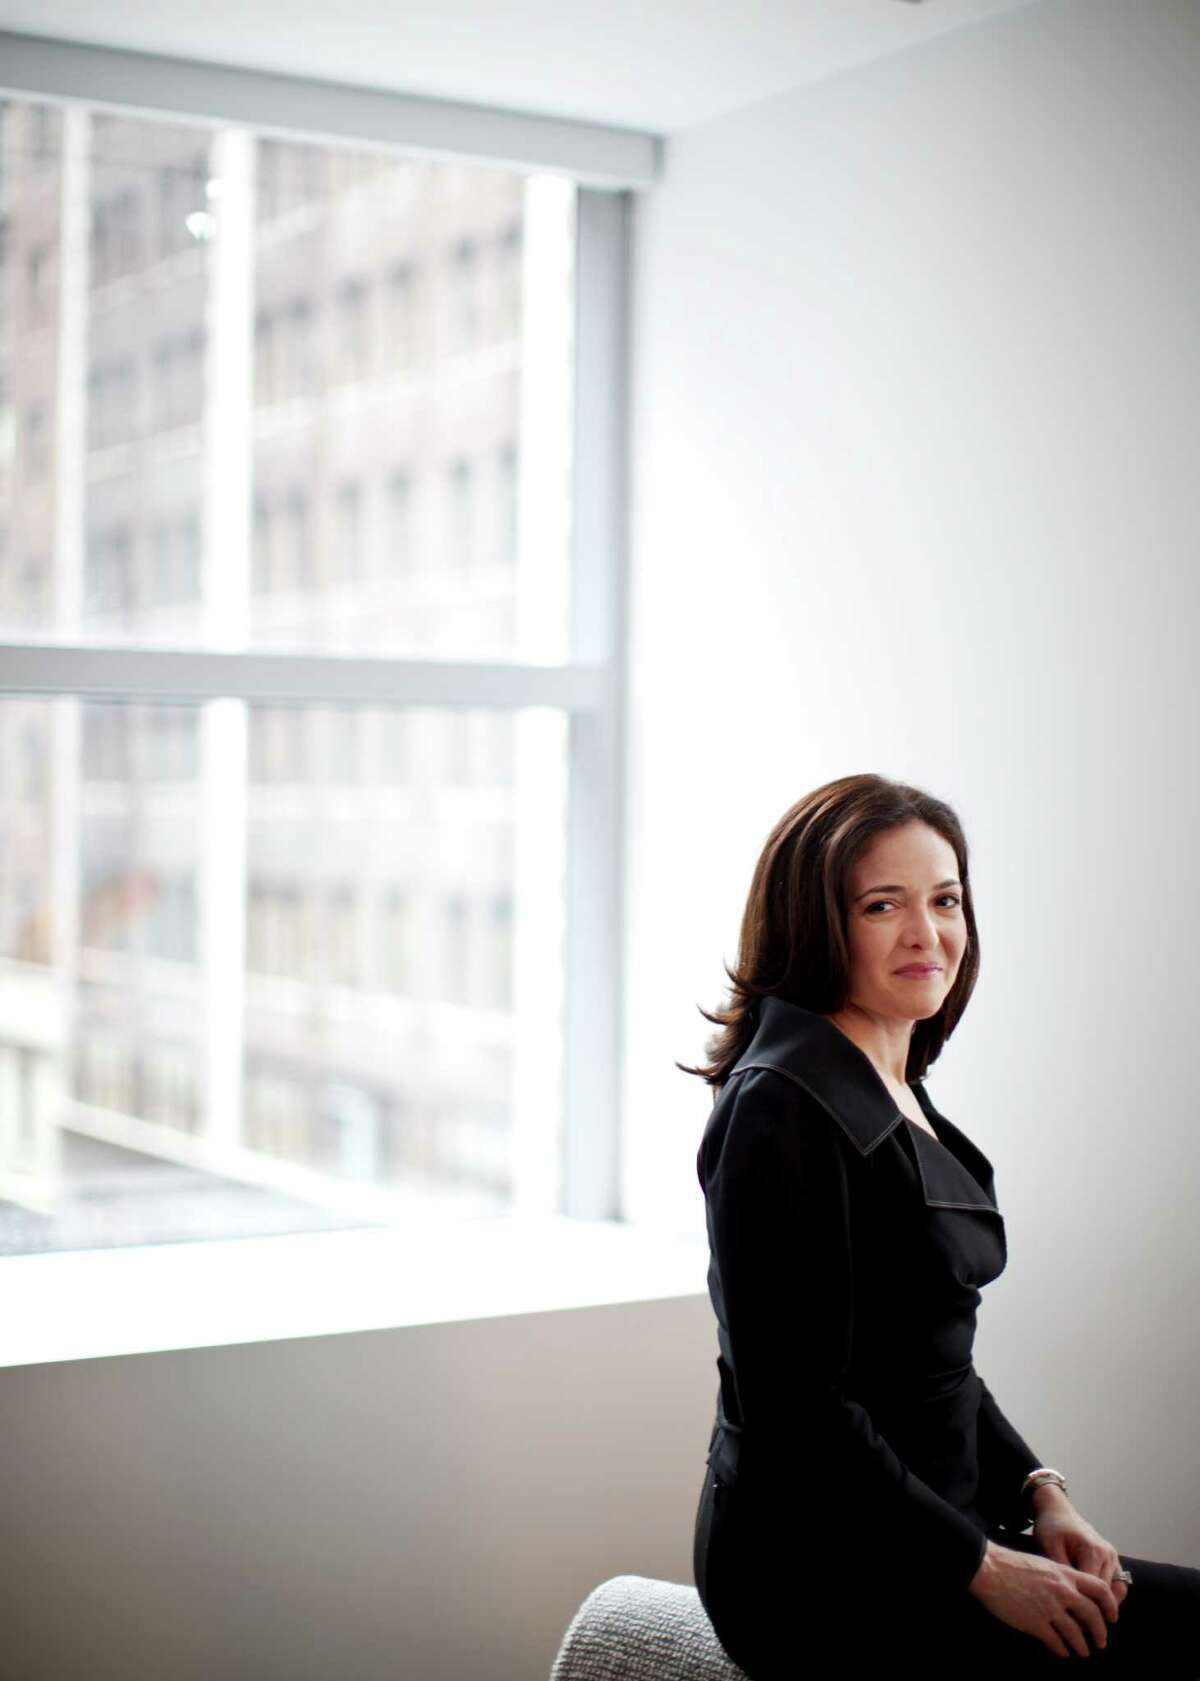 FILE -- Sheryl Sandberg, the chief operating officer of Facebook, at the company's offices in New York, Sept. 28, 2010. Sandberg's book, "Lean In," to be published on March 2013, is her book-slash-manifesto on women in the workplace. (Todd Heisler/The New York Times)